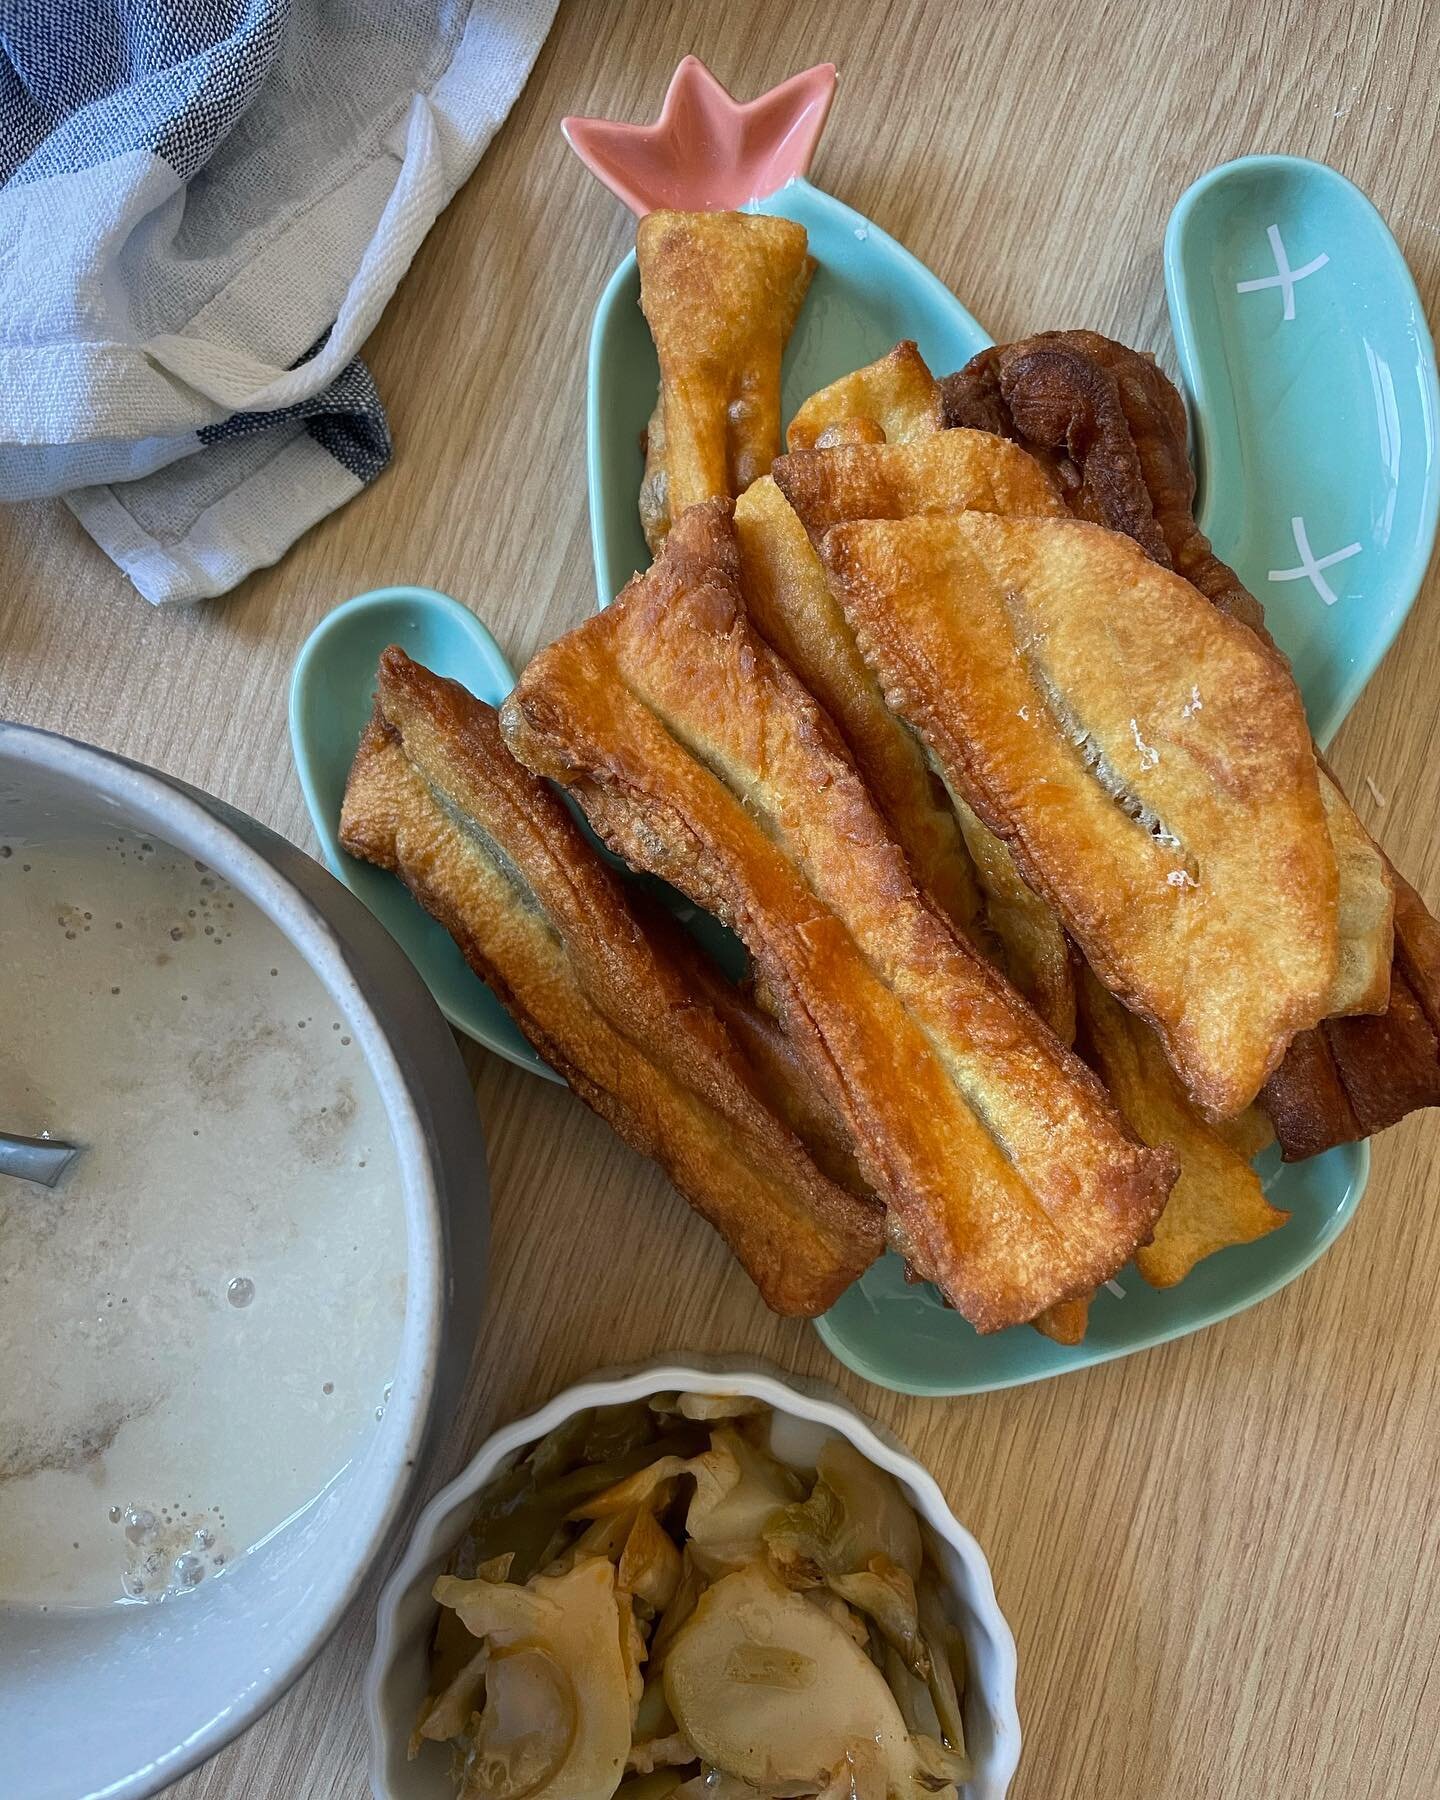 Lots of cooking this weekend but I think made me the happiest. Taste was 3/5 (need to practice the donut), but nostalgia was 5/5. This is one of my favorite breakfasts - Savory Soy Milk w/ Chinese Donuts (Team Savory! savory &gt; sweet 😉). I remembe